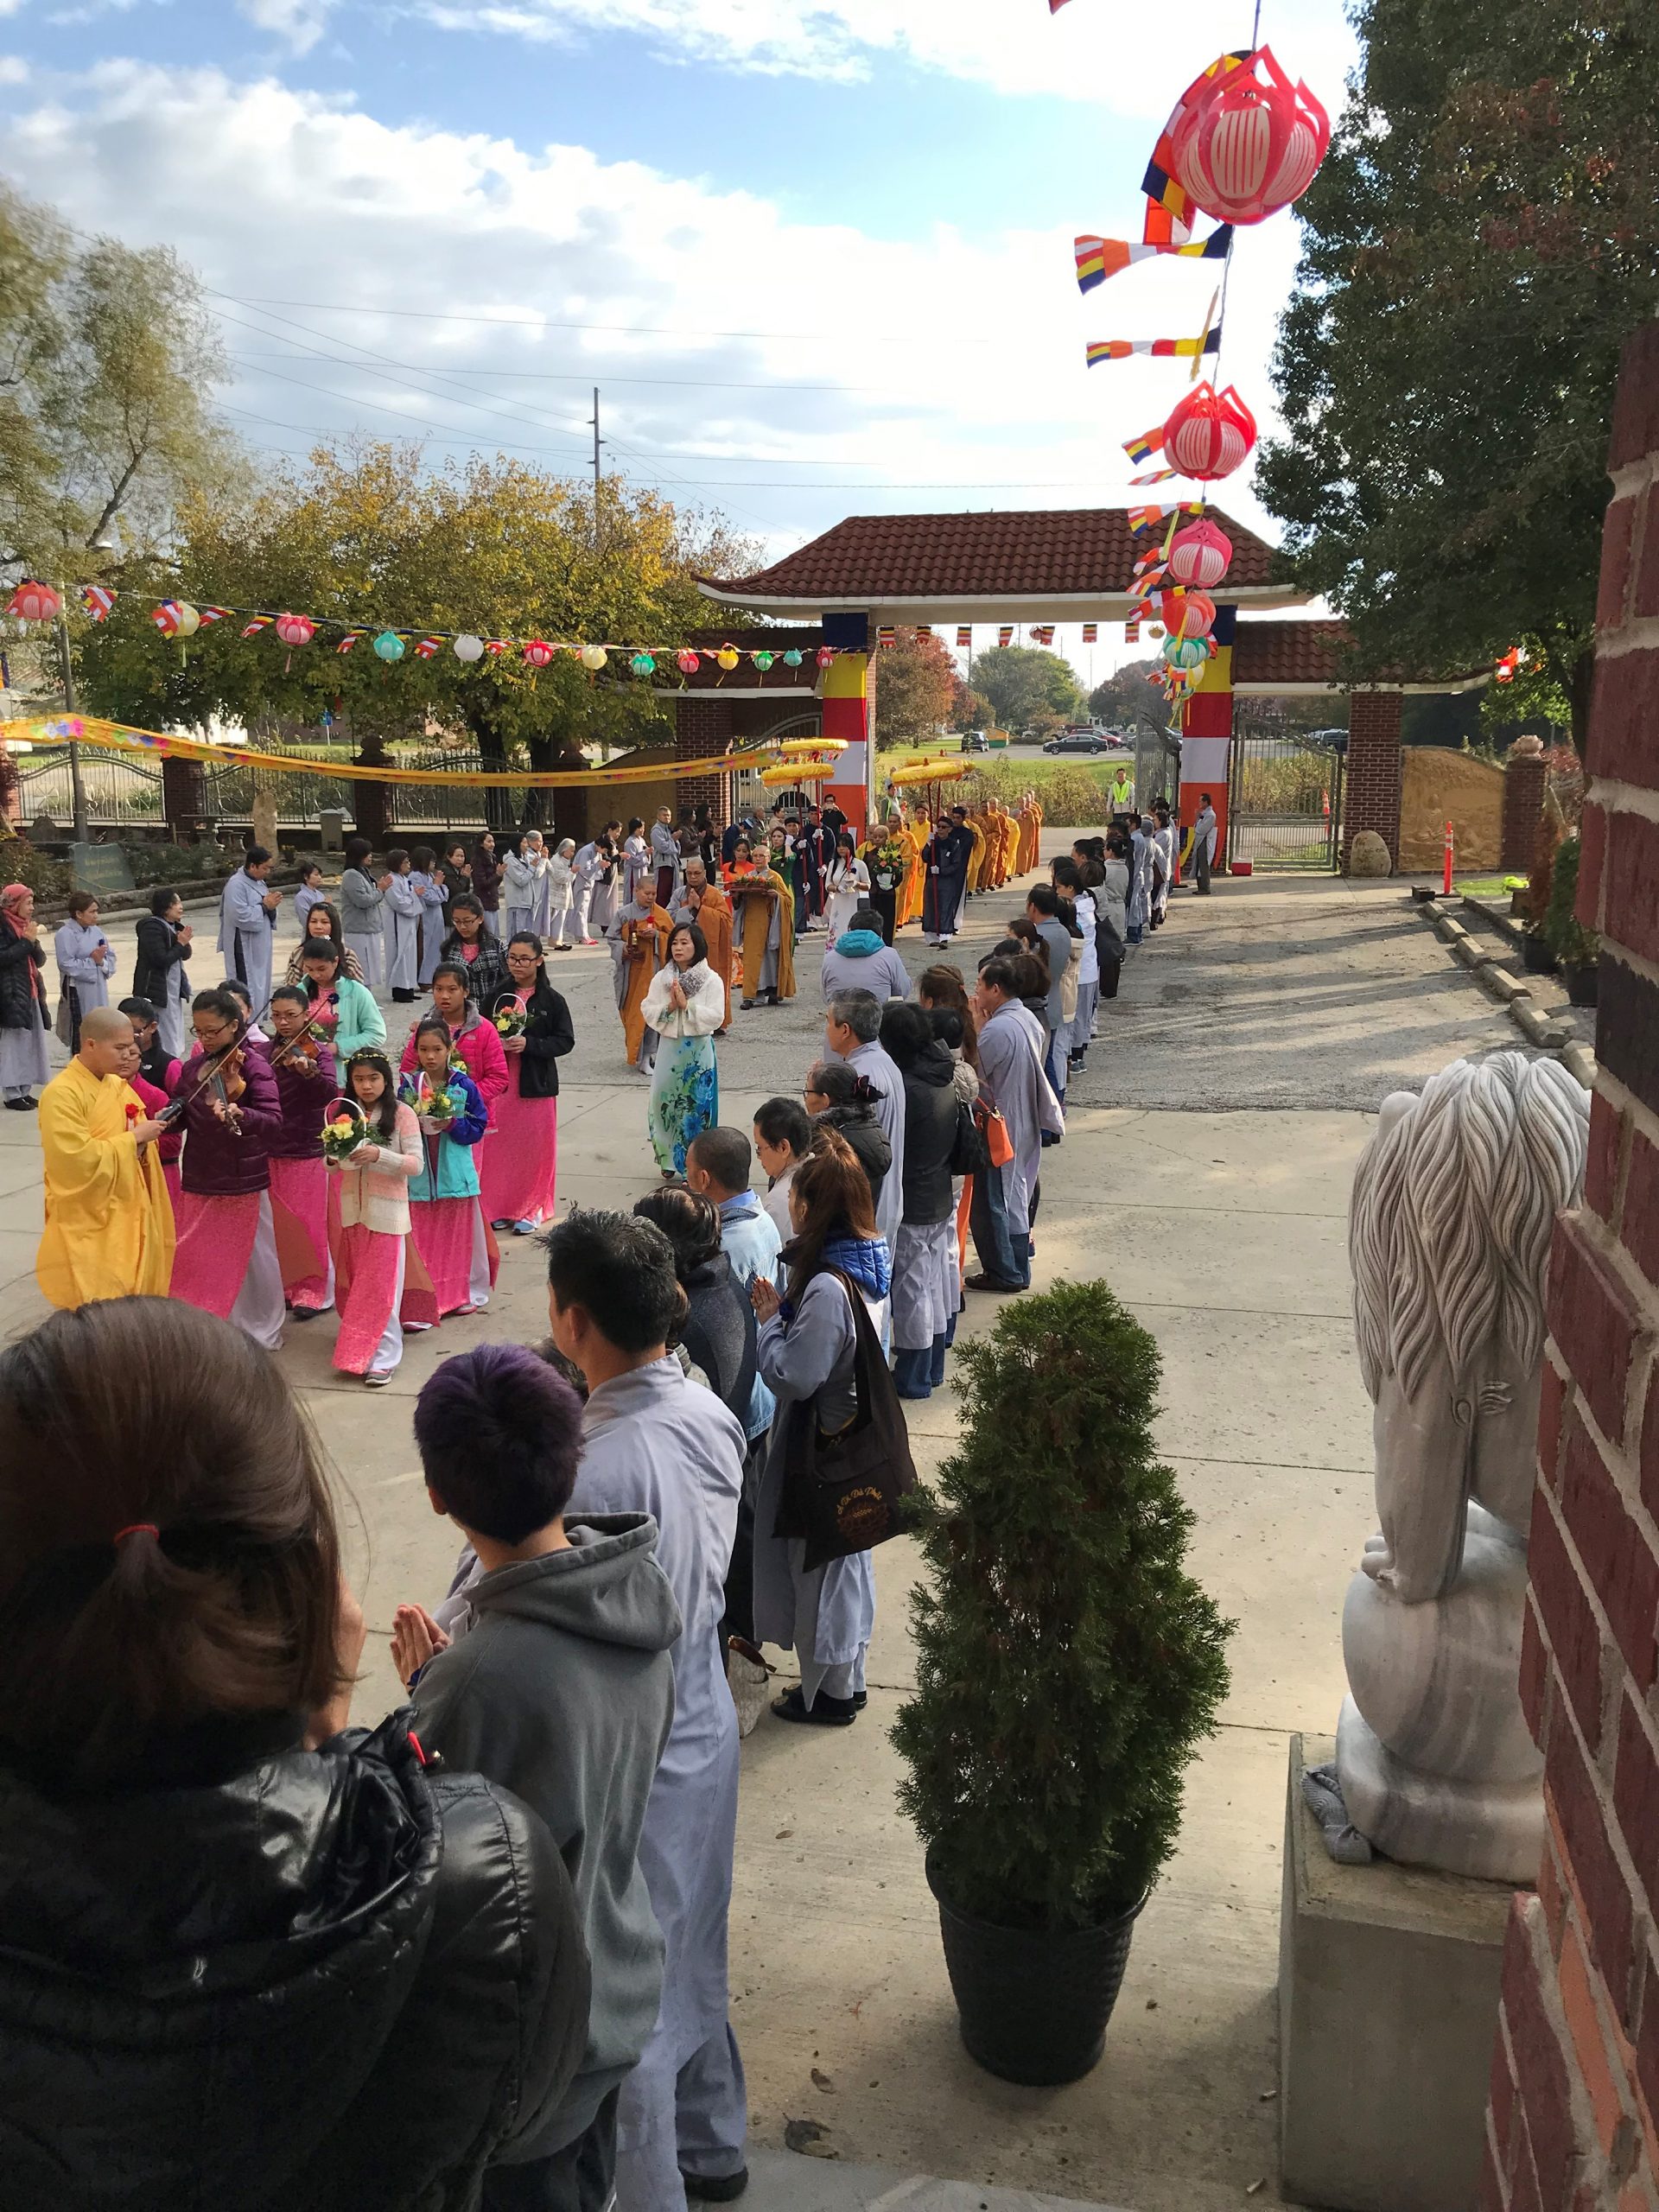 Two rows of people, most in gray robes, line the procession on a long, concrete courtyard. The yellow-robed monks, proceeded by colorfully-dressed women holding flowers, process from a pagoda archway at the far end.